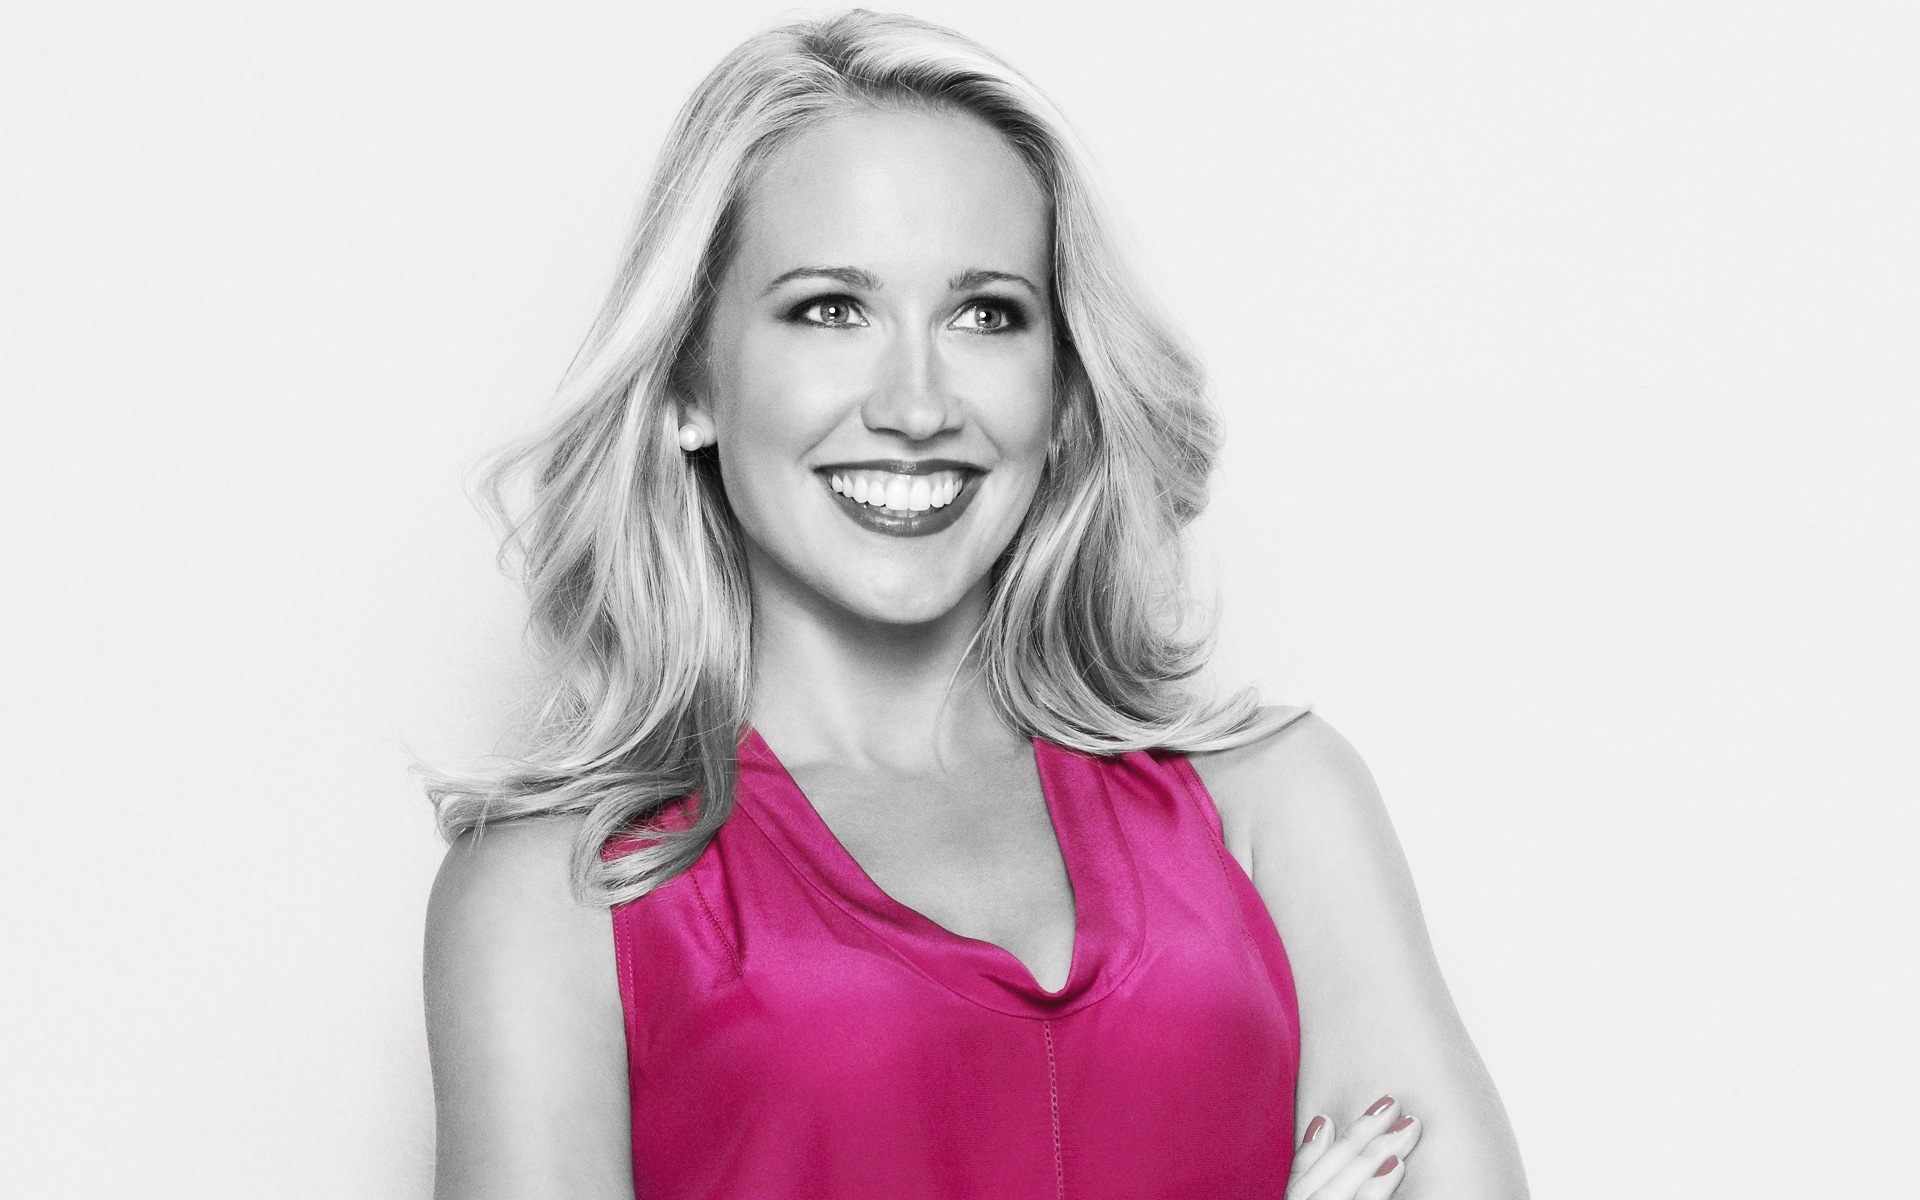 Anna Camp Wallpapers